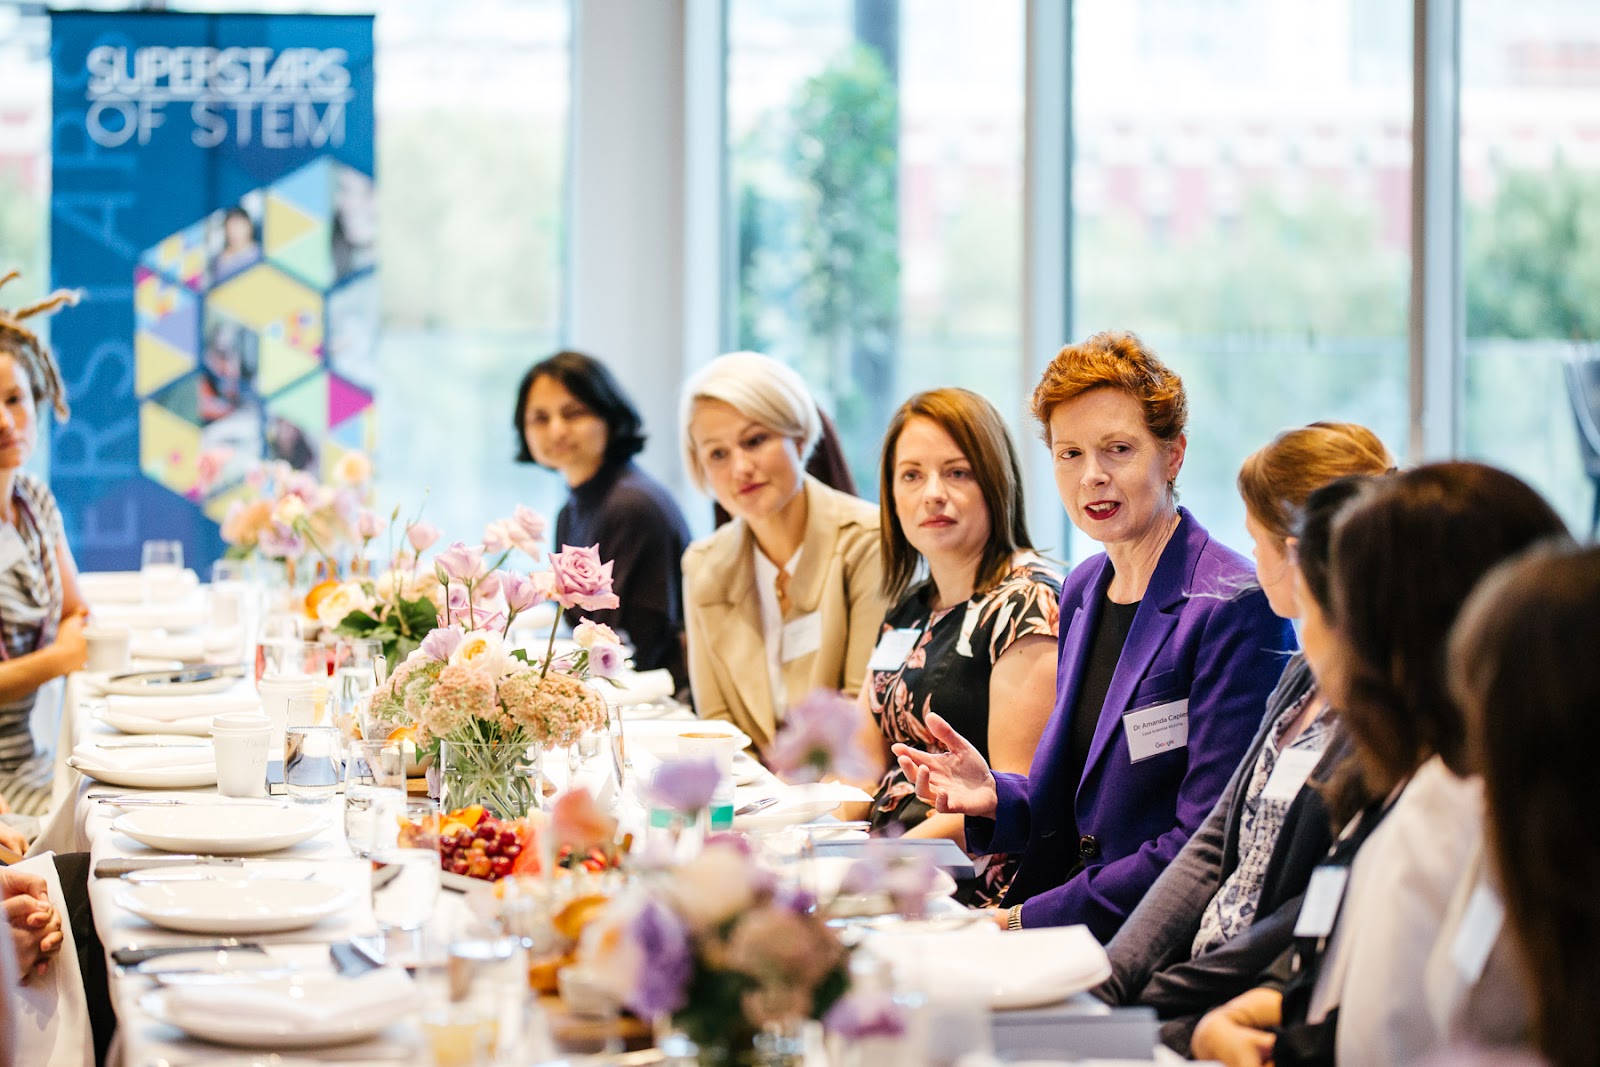 Photos of event attendees at the Women in STEM breakfast